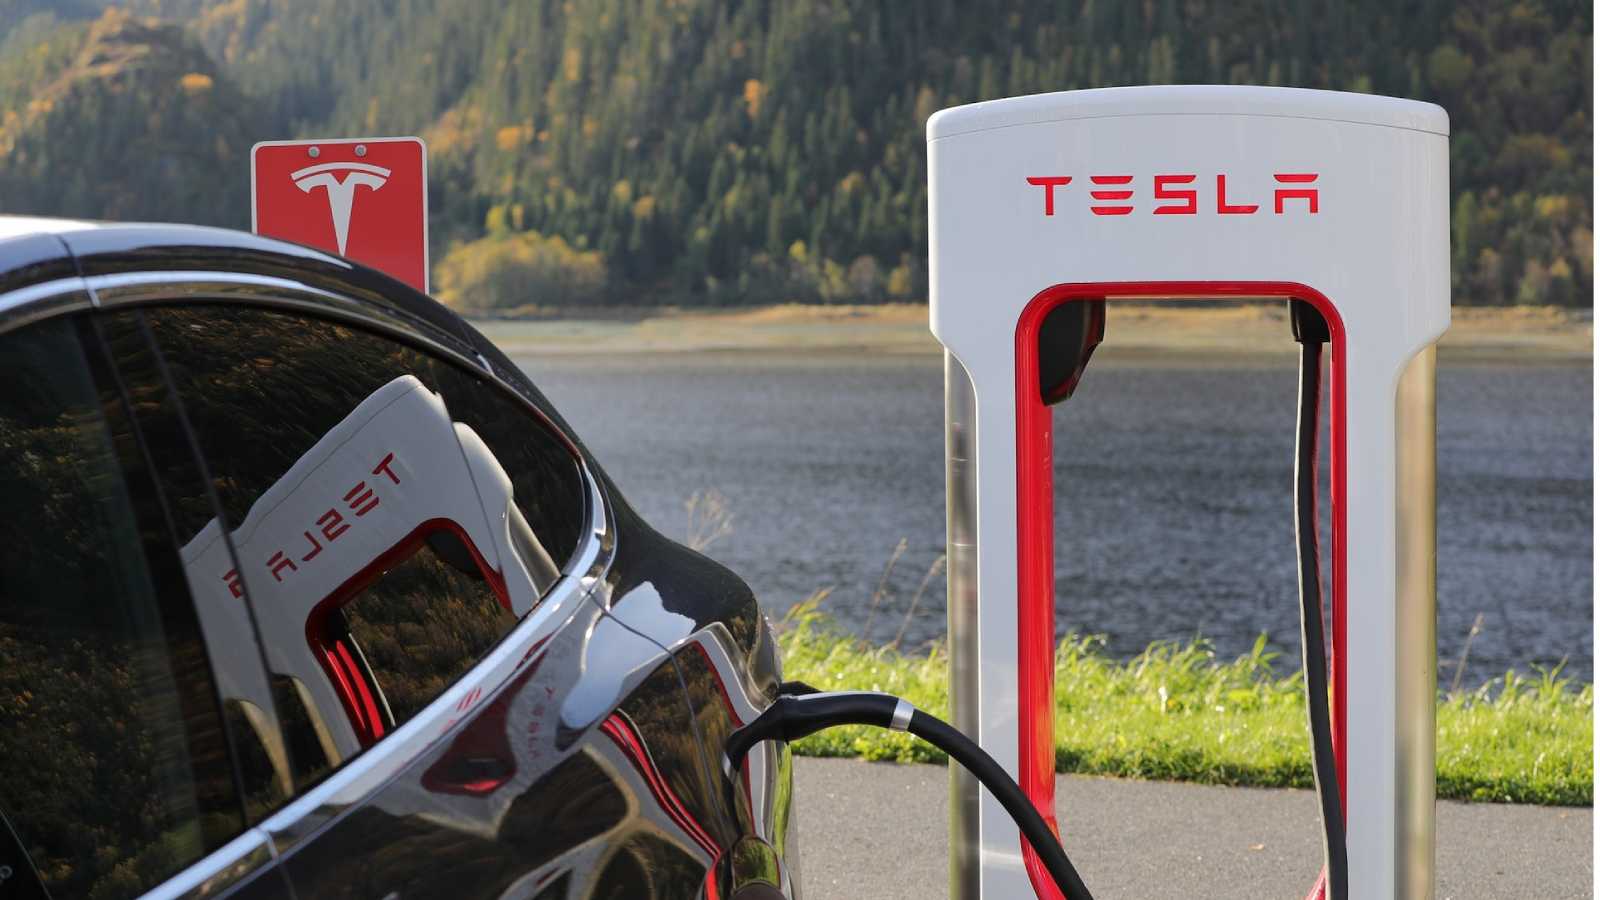 Norway and China are leading the way in electric vehicle sales